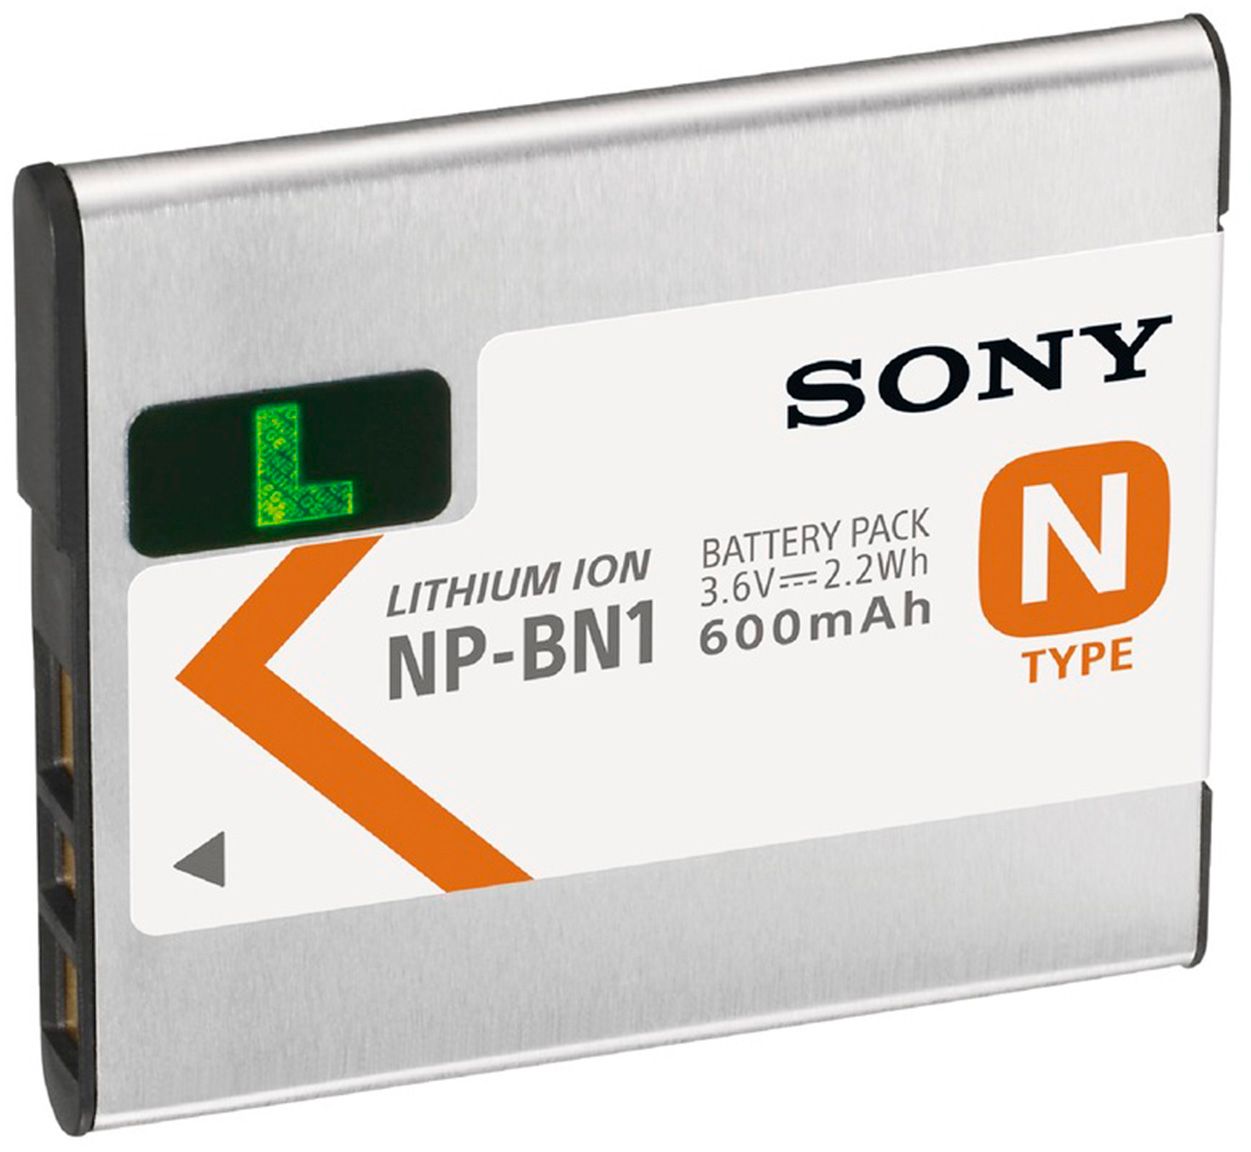 Best Buy: Rechargeable Lithium-Ion Battery Pack for Sony NP-BN1 NPBN1